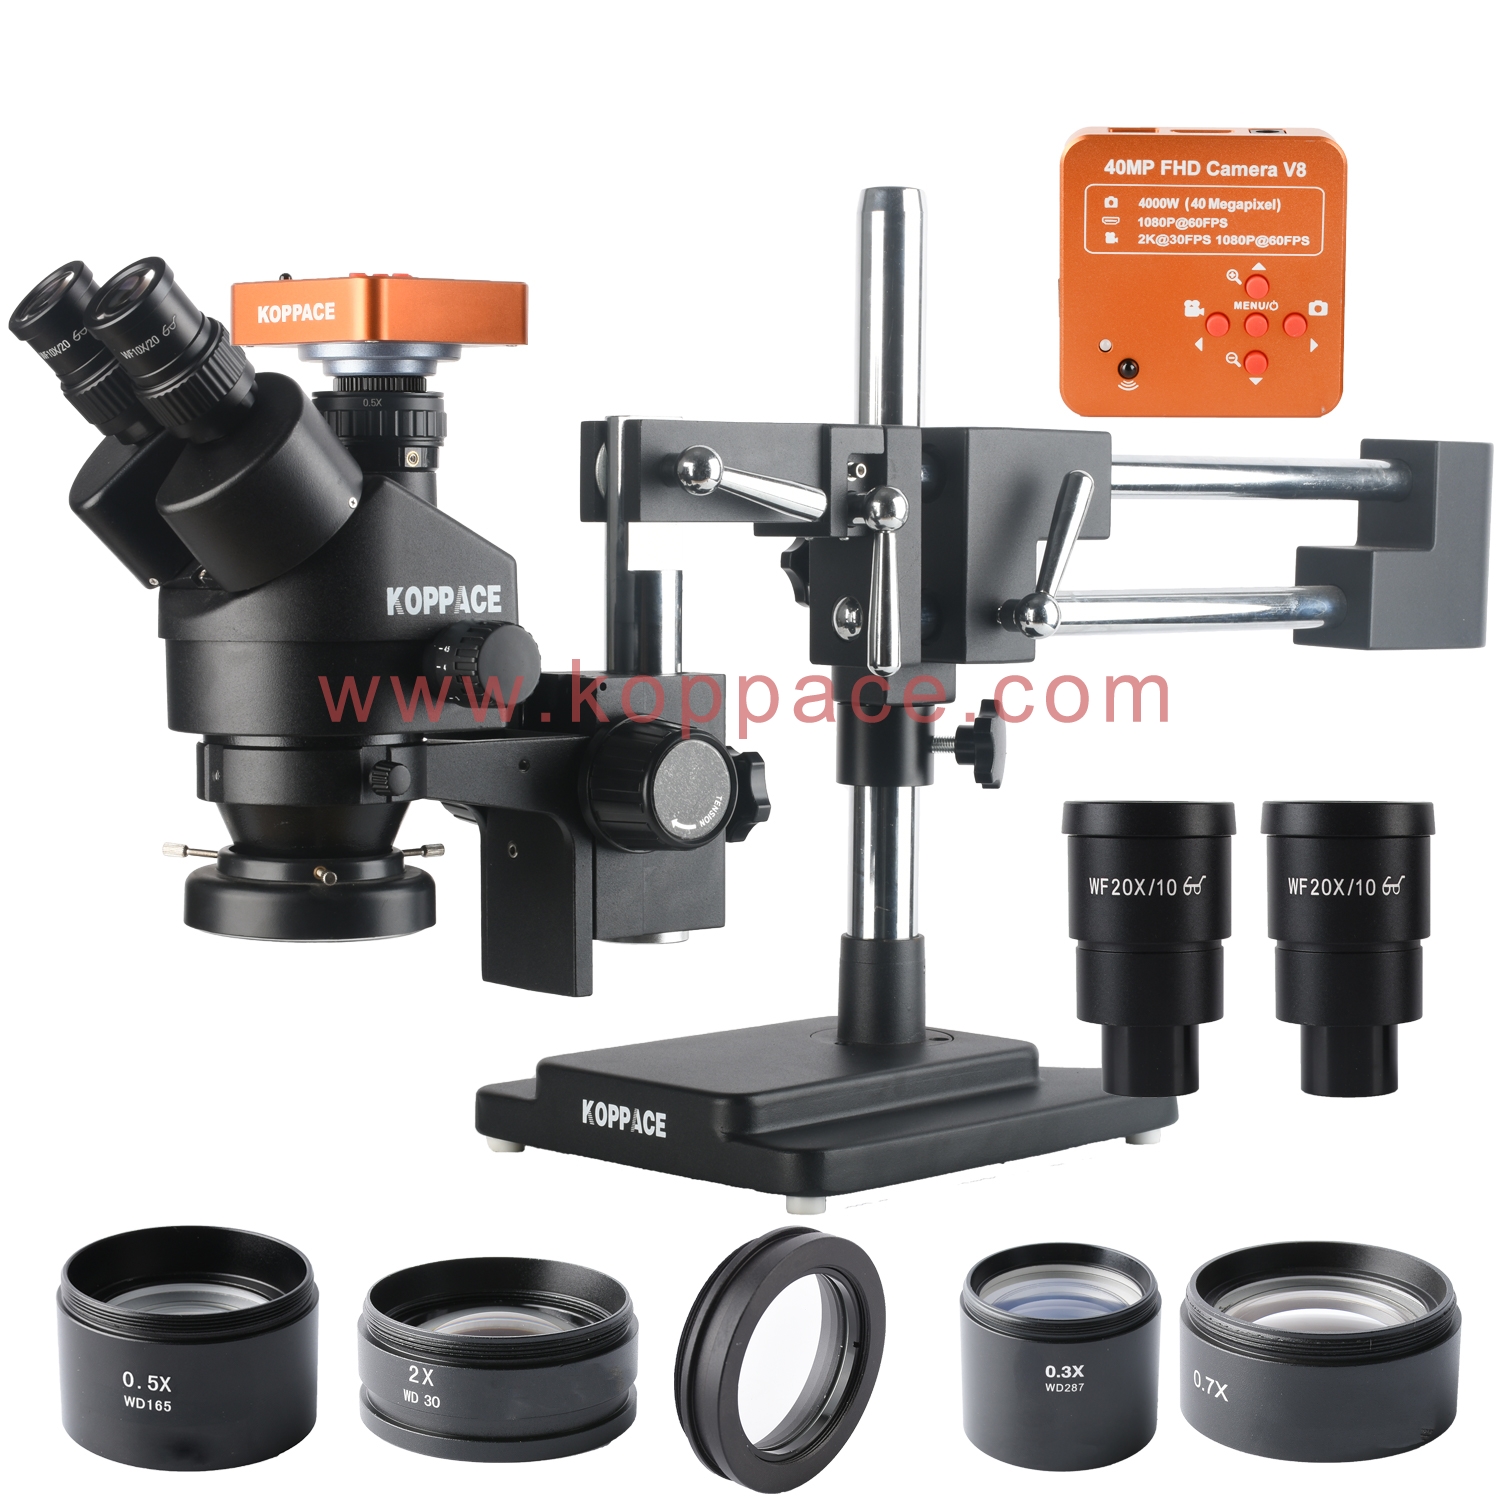 KOPPACE 18 Million Pixels Industrial Microscope Camera Support Image and Video 